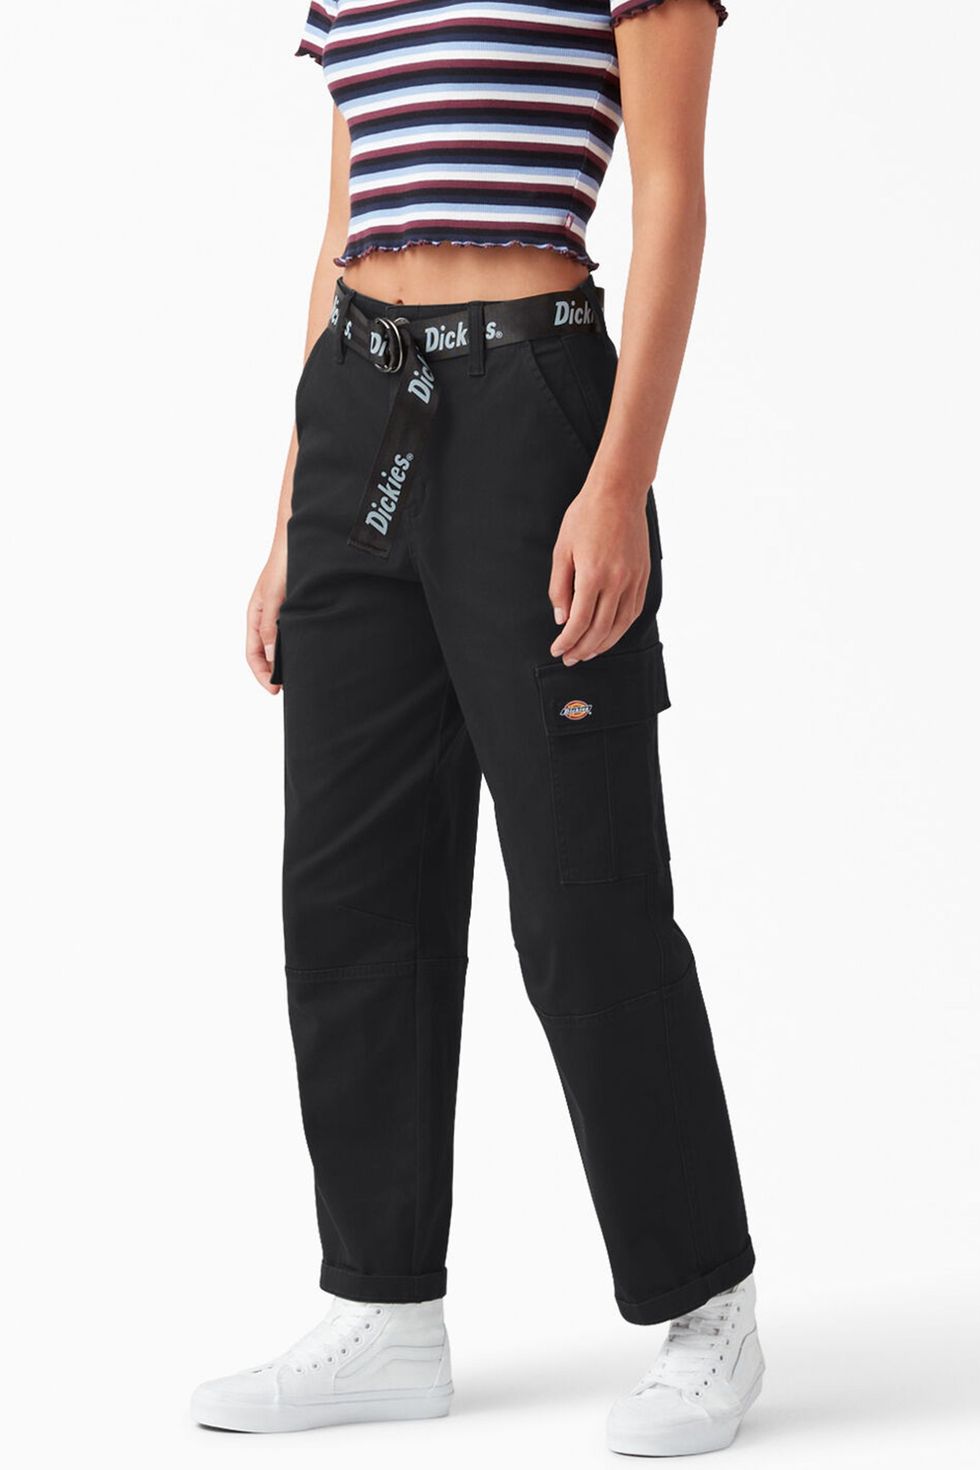 Hot Topic Black Cropped Pants for Women